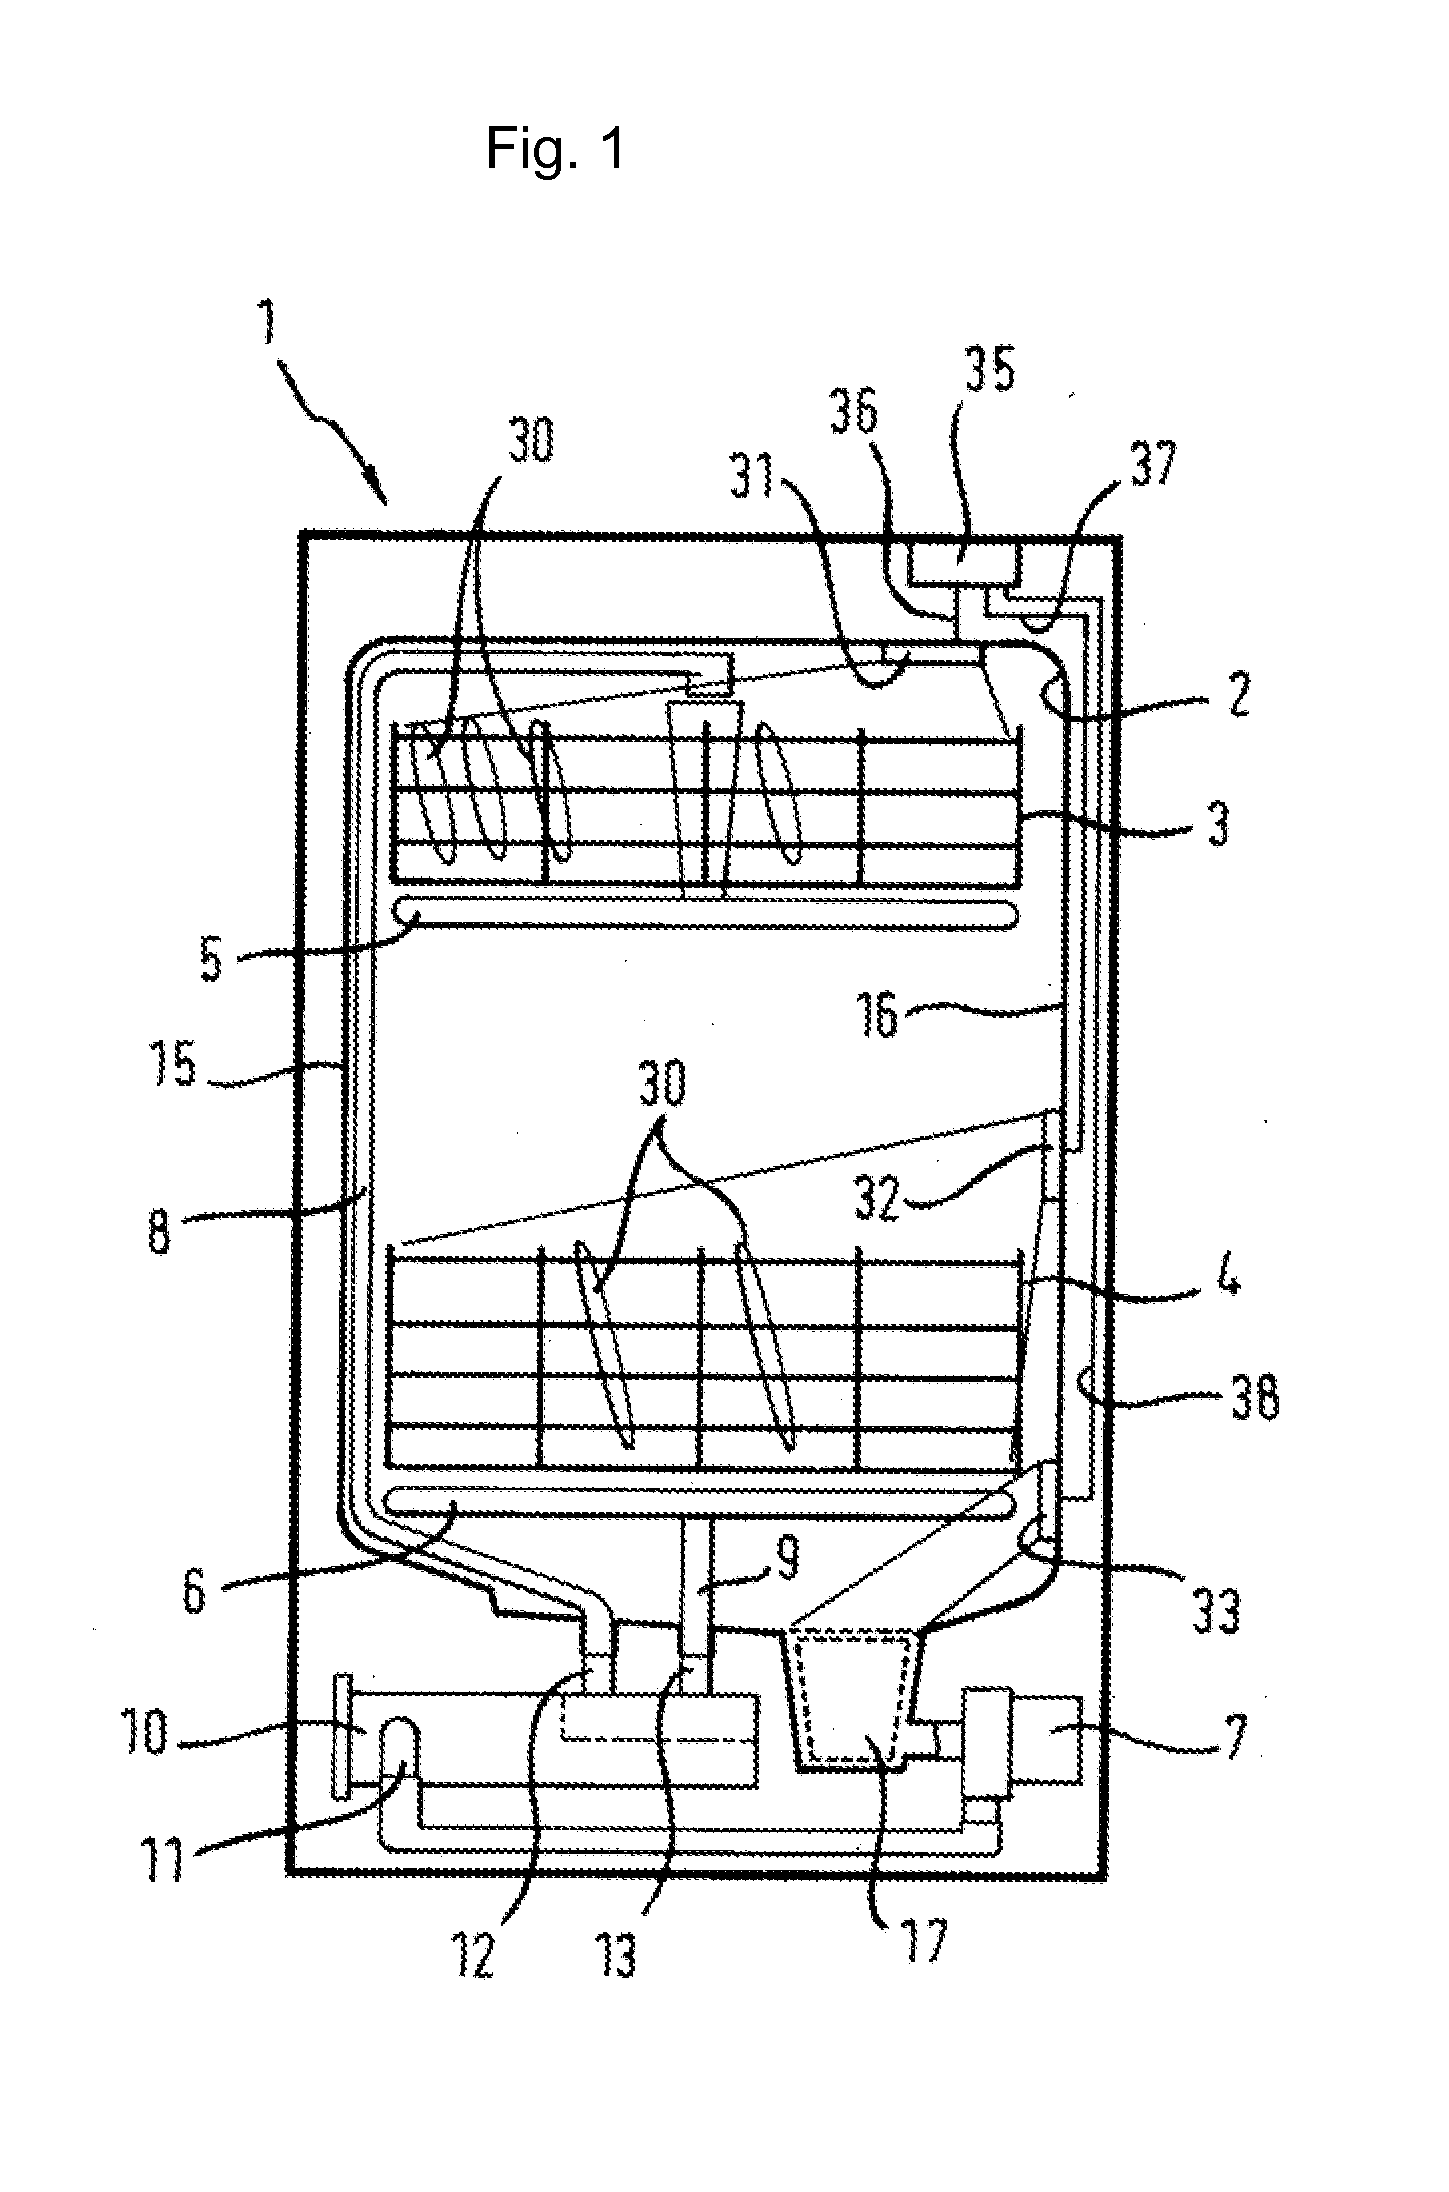 Method for detecting the load of items to be washed, and dishwasher machine